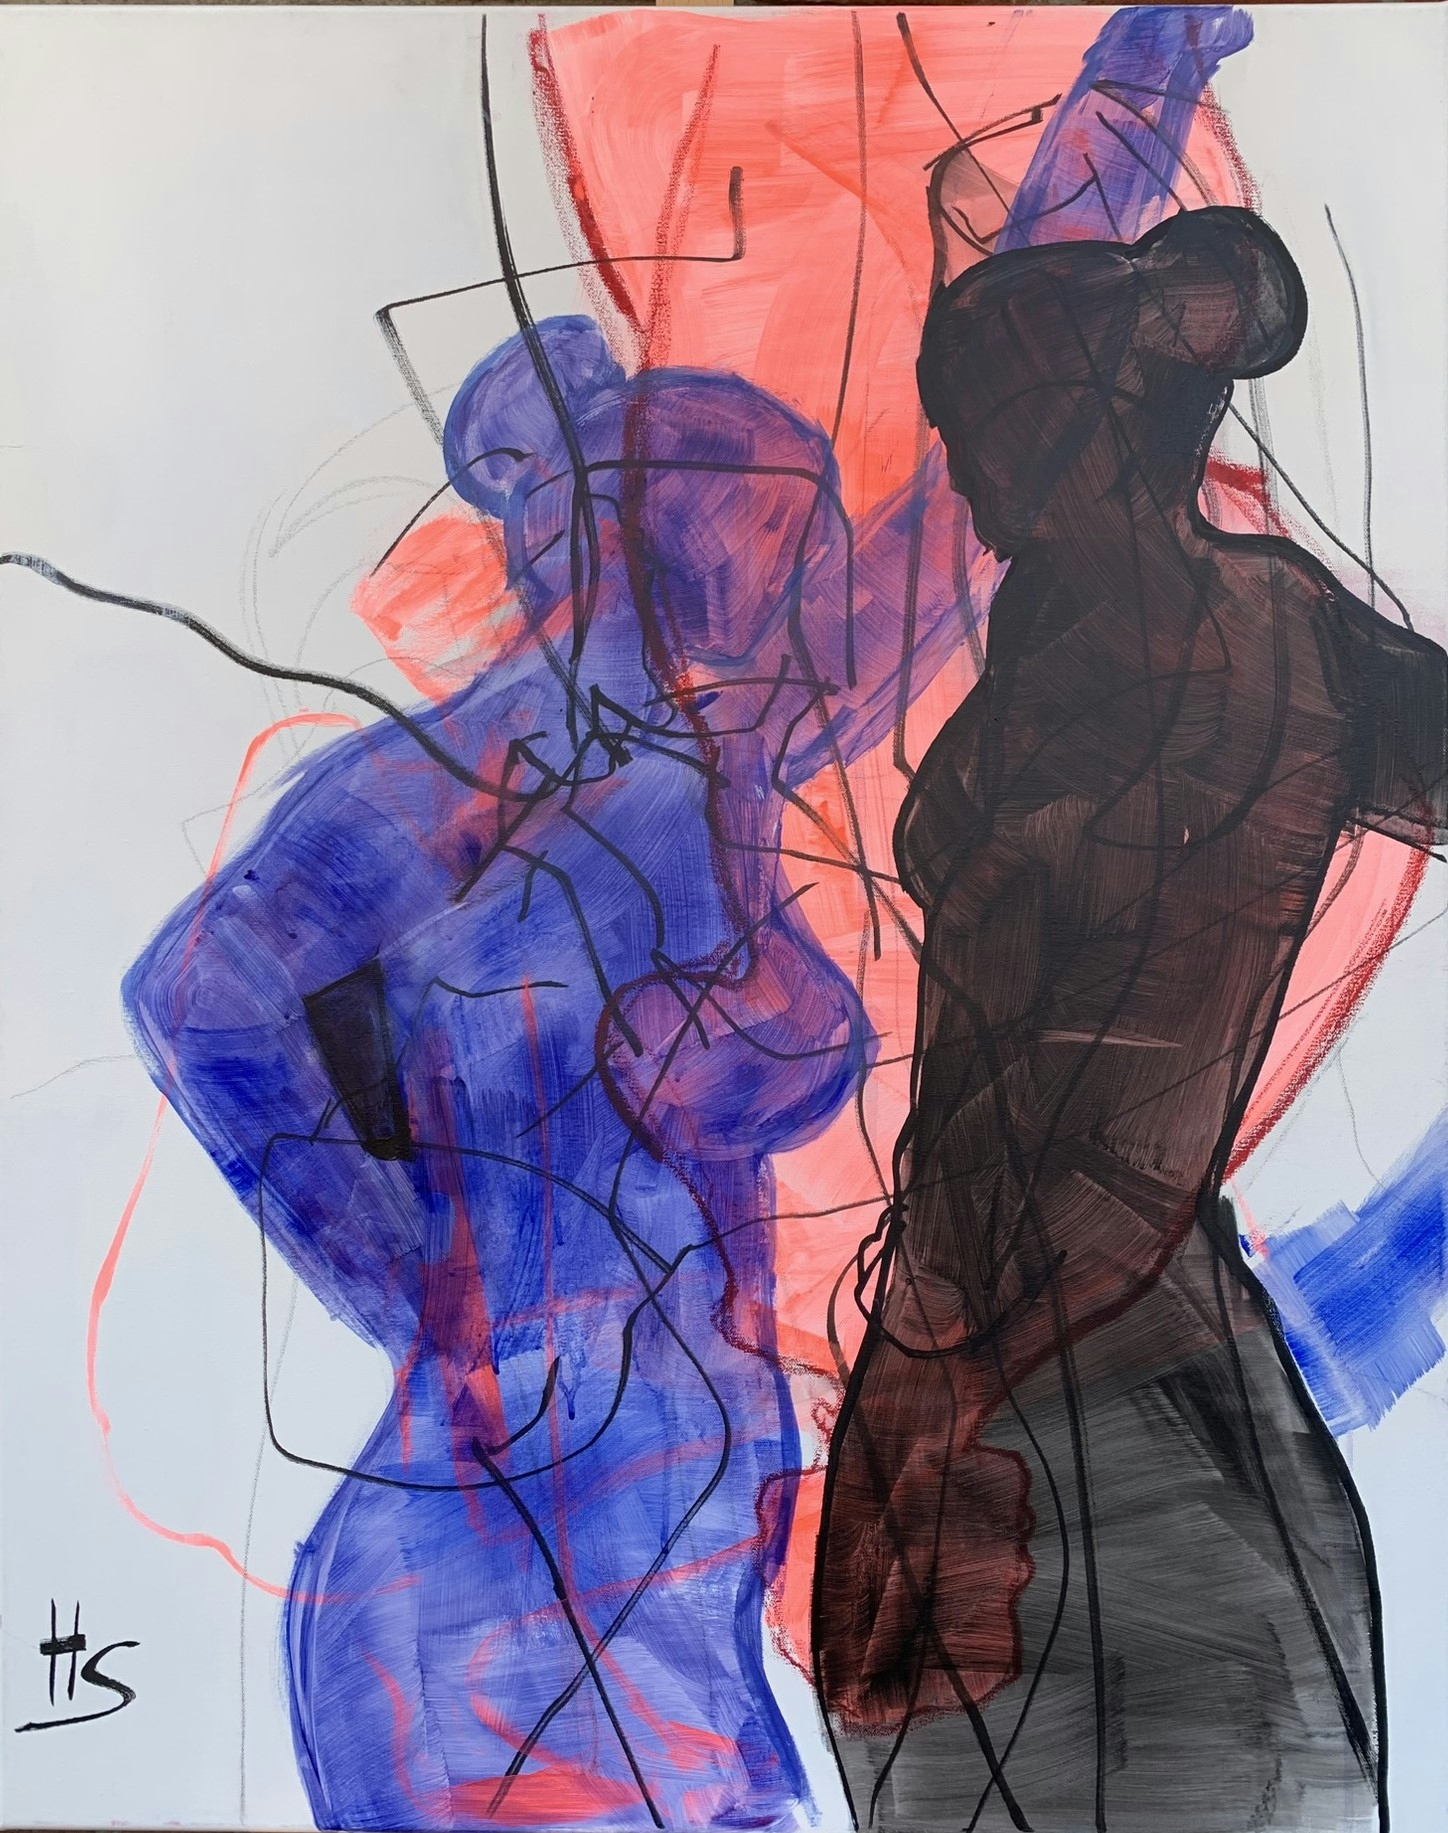 Nude artwork by Heike Schümann depicts two standing women looking at each other